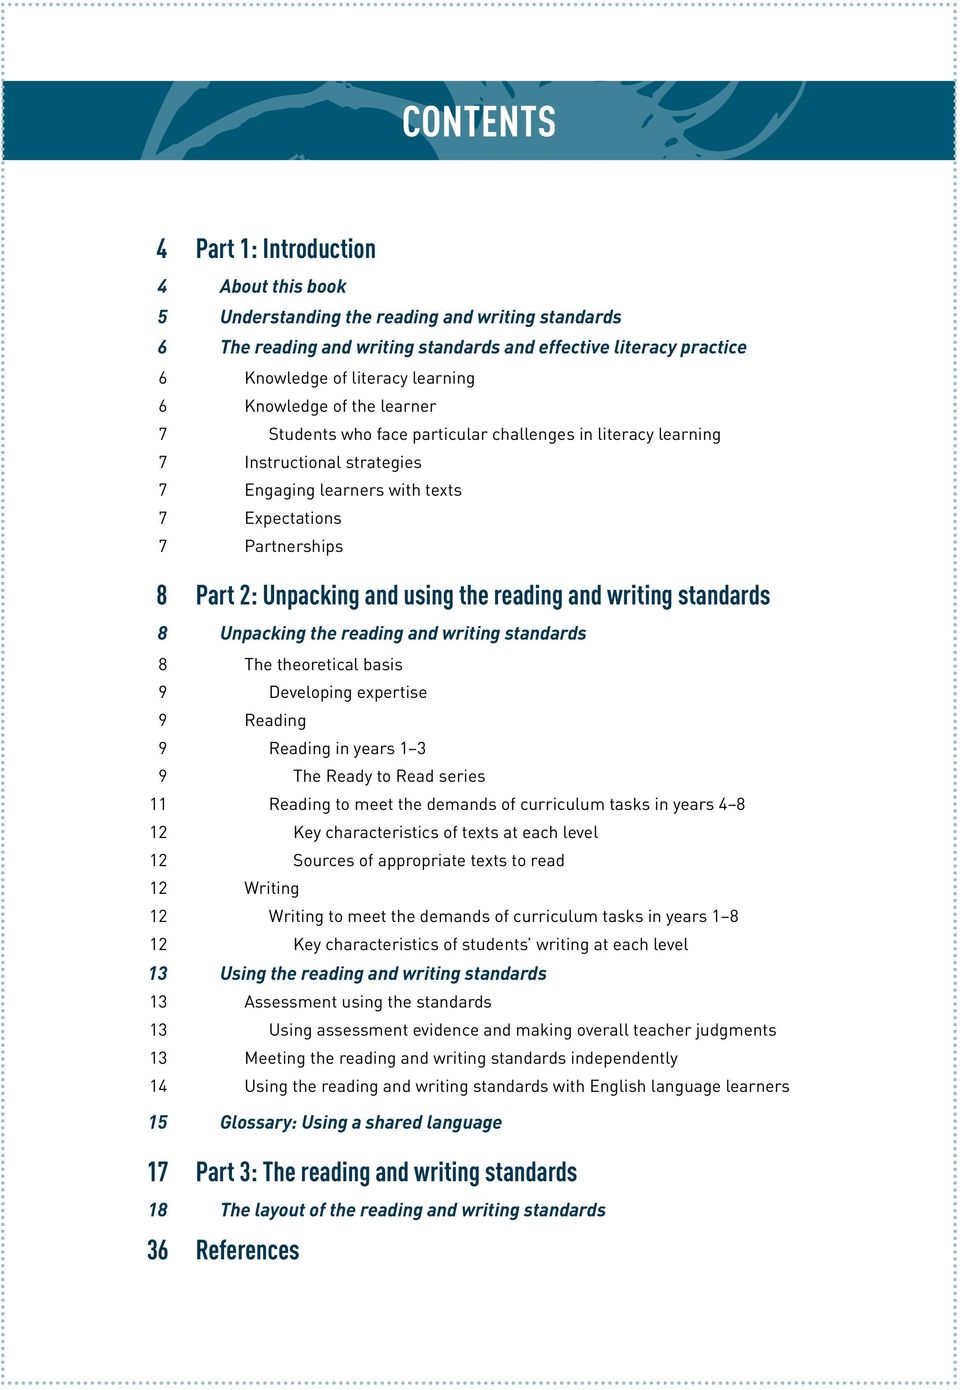 Unpacking and using the reading and writing standards 8 Unpacking the reading and writing standards 8 The theoretical basis 9 Developing expertise 9 Reading 9 Reading in years 1 3 9 The Ready to Read